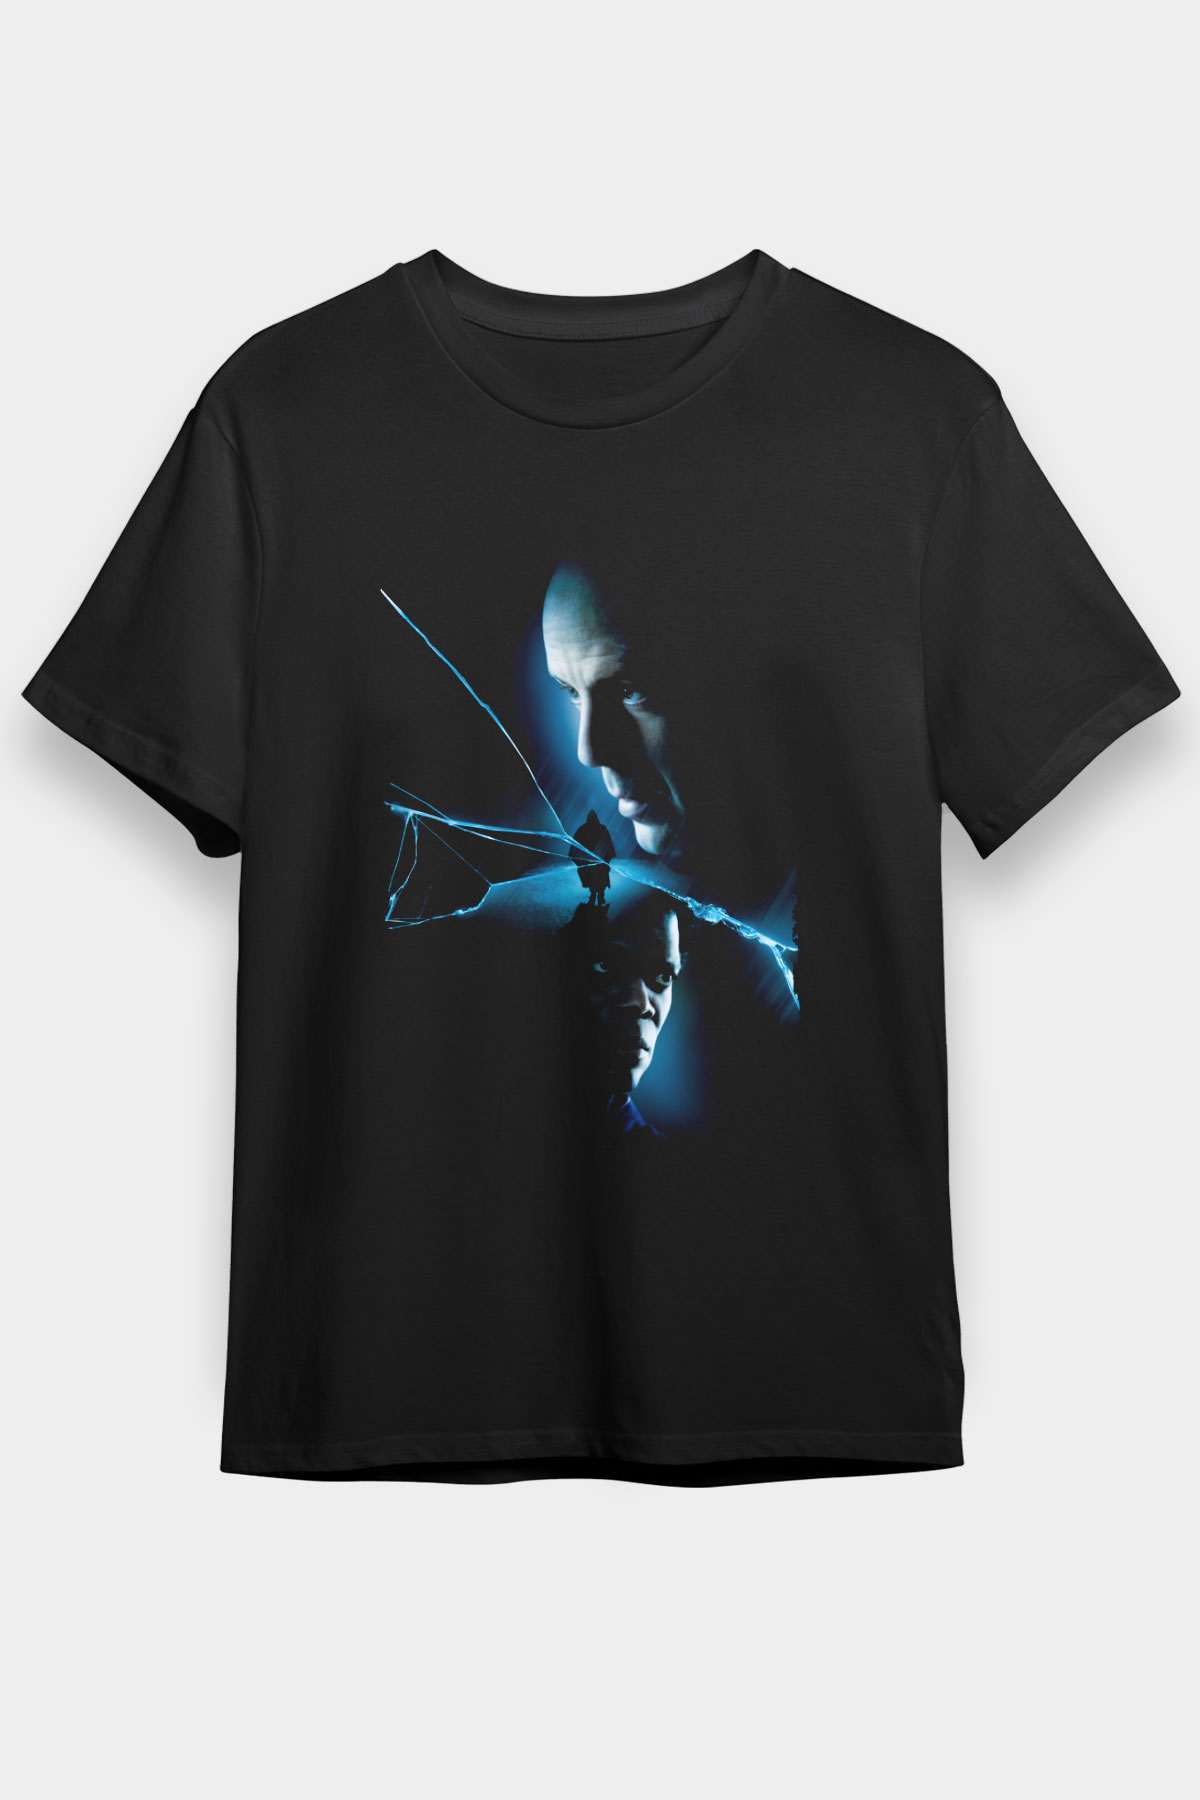 Unbreakable T shirt,Movie , Tv and Games Tshirt /